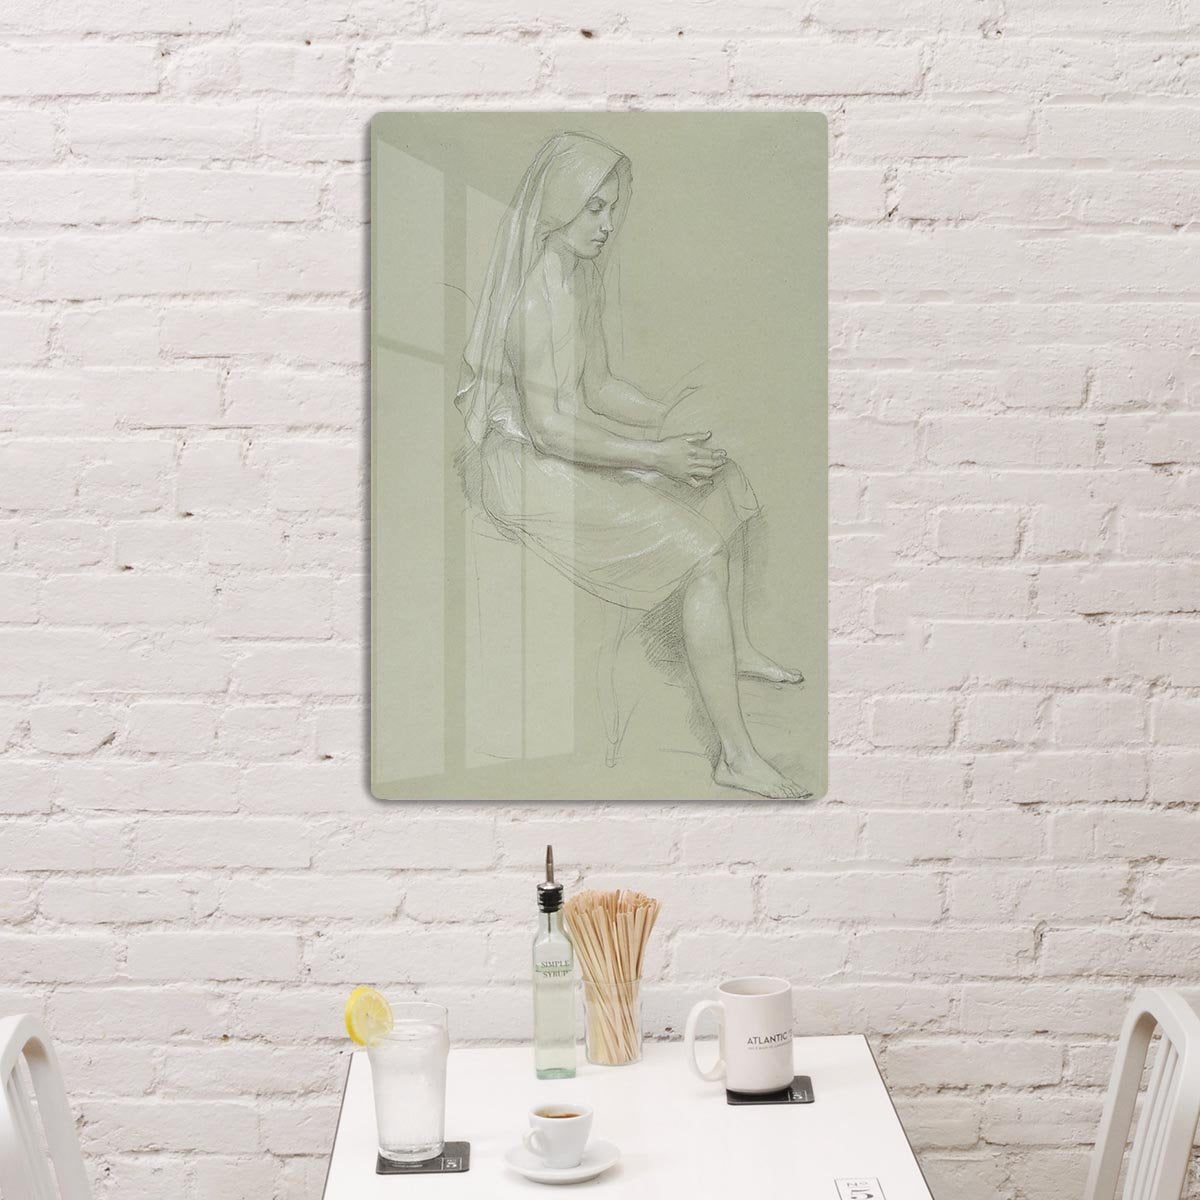 Study of a Seated Veiled Female Figure 19th Century By Bouguereau HD Metal Print